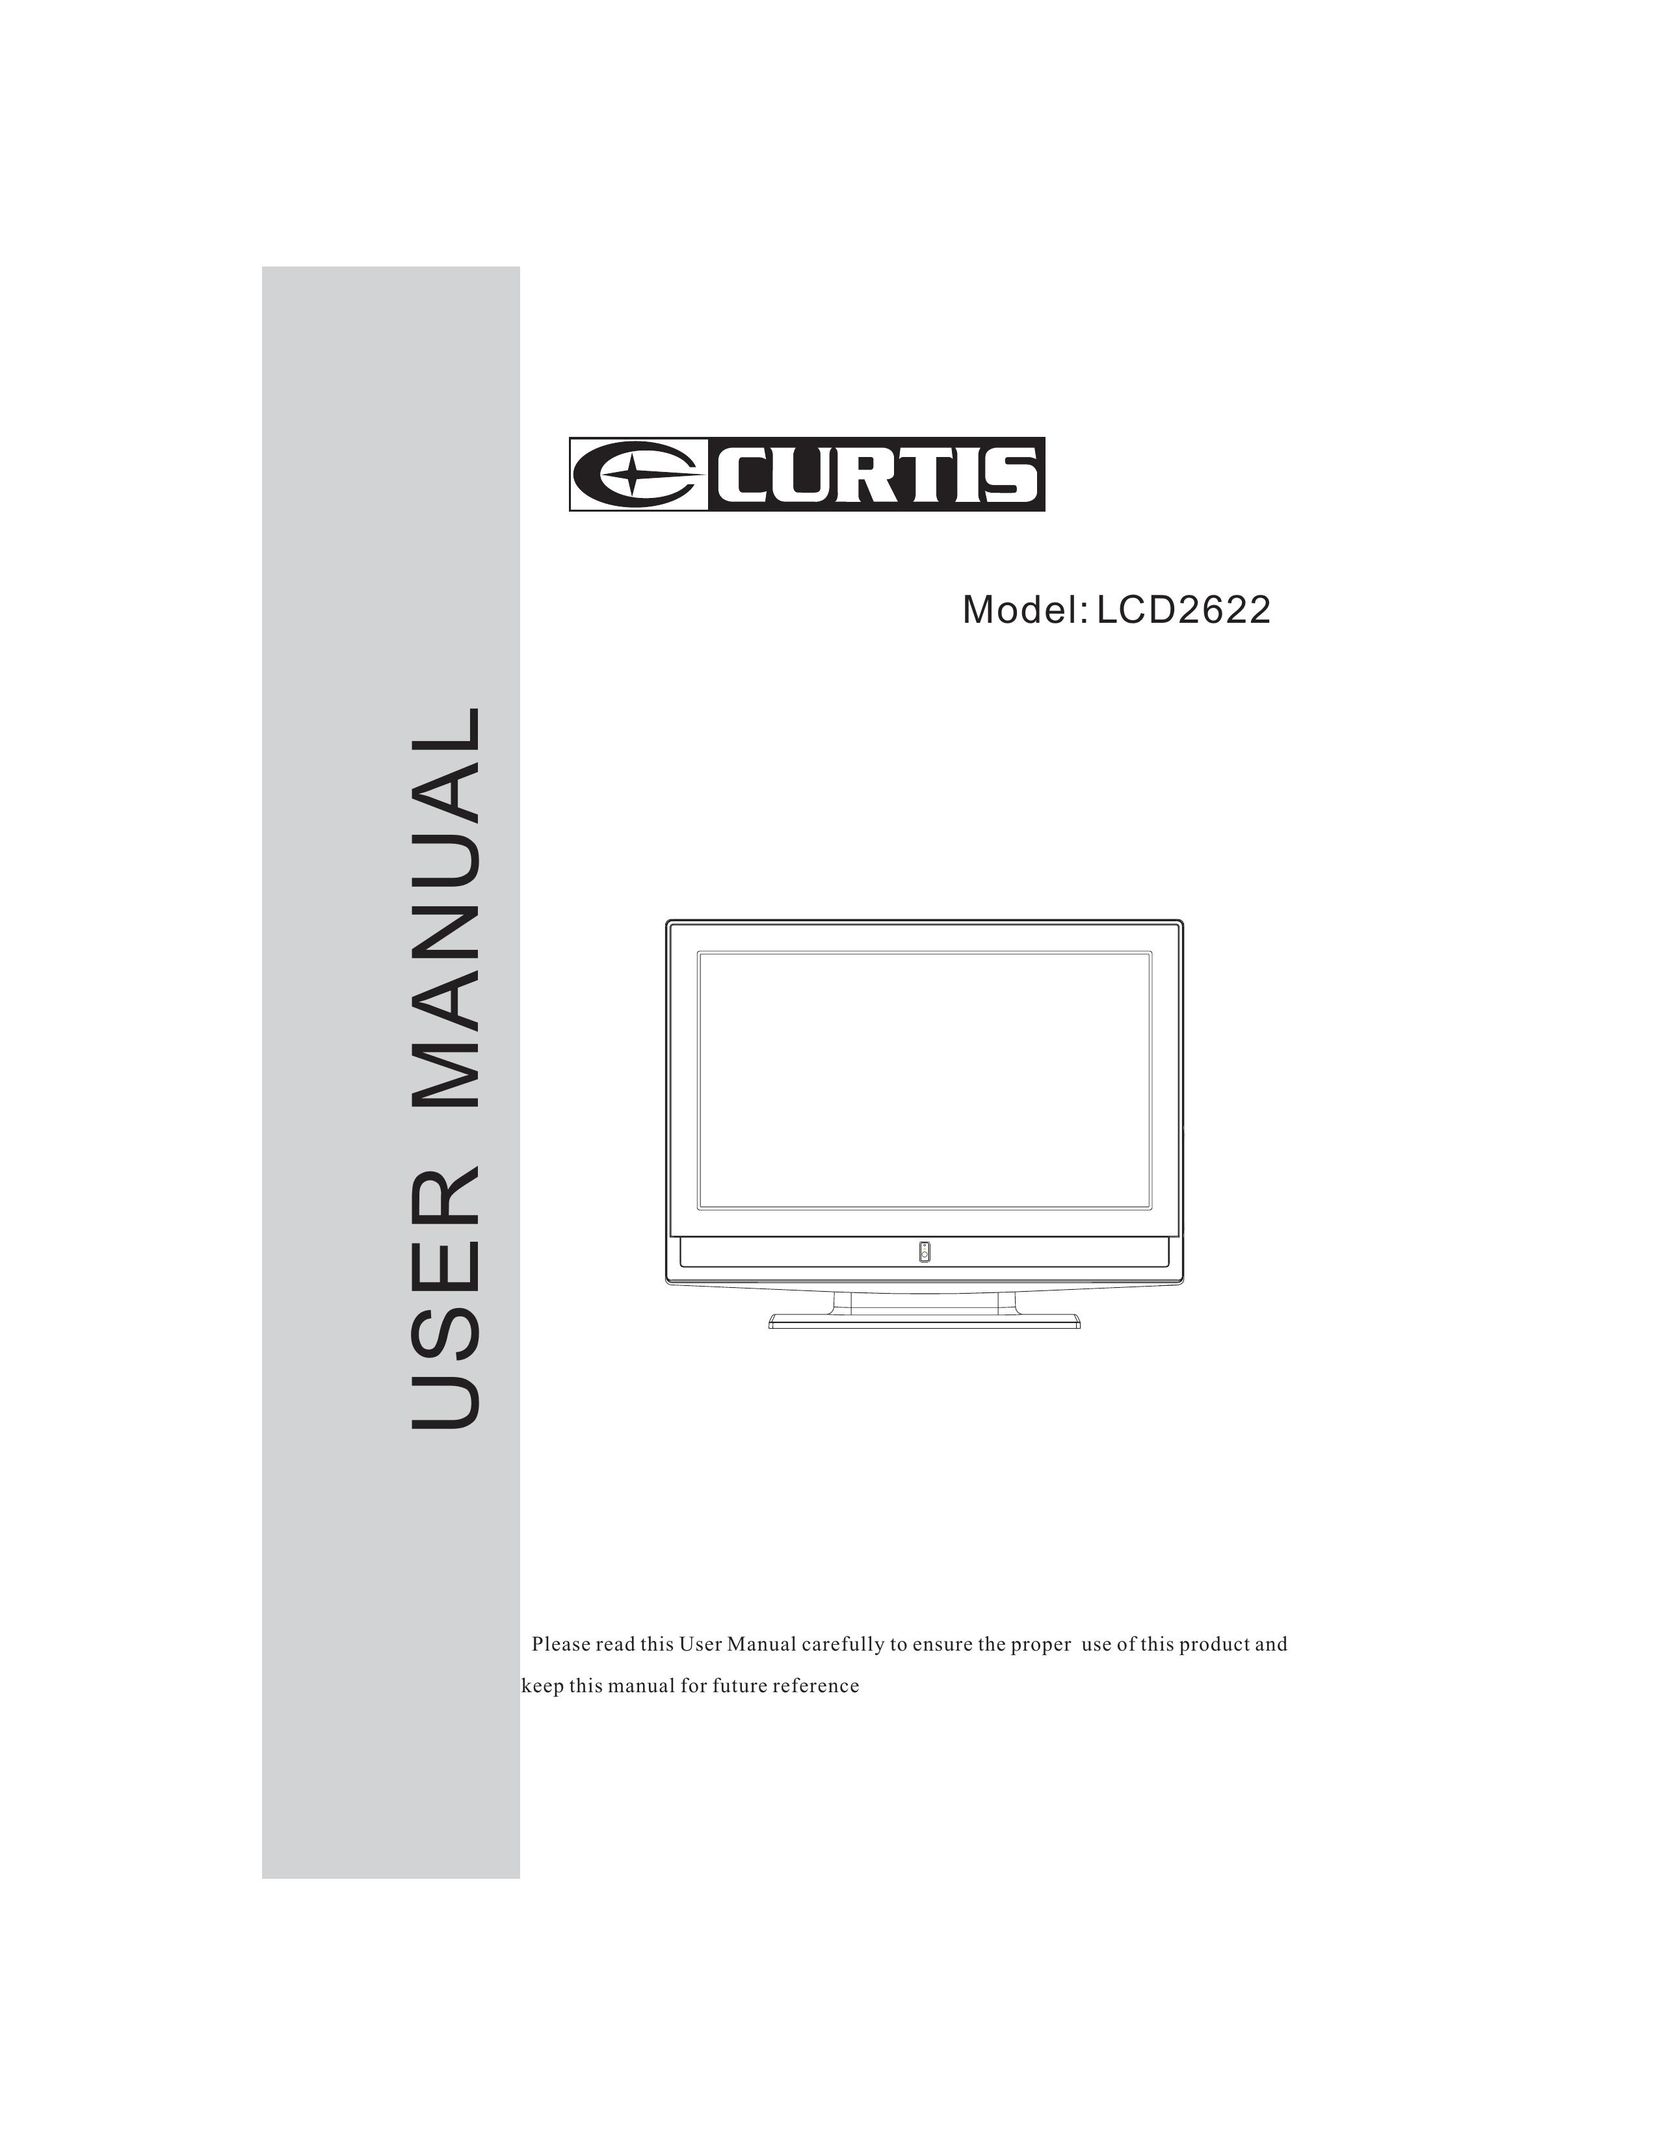 Esselte LCD2622 Computer Monitor User Manual